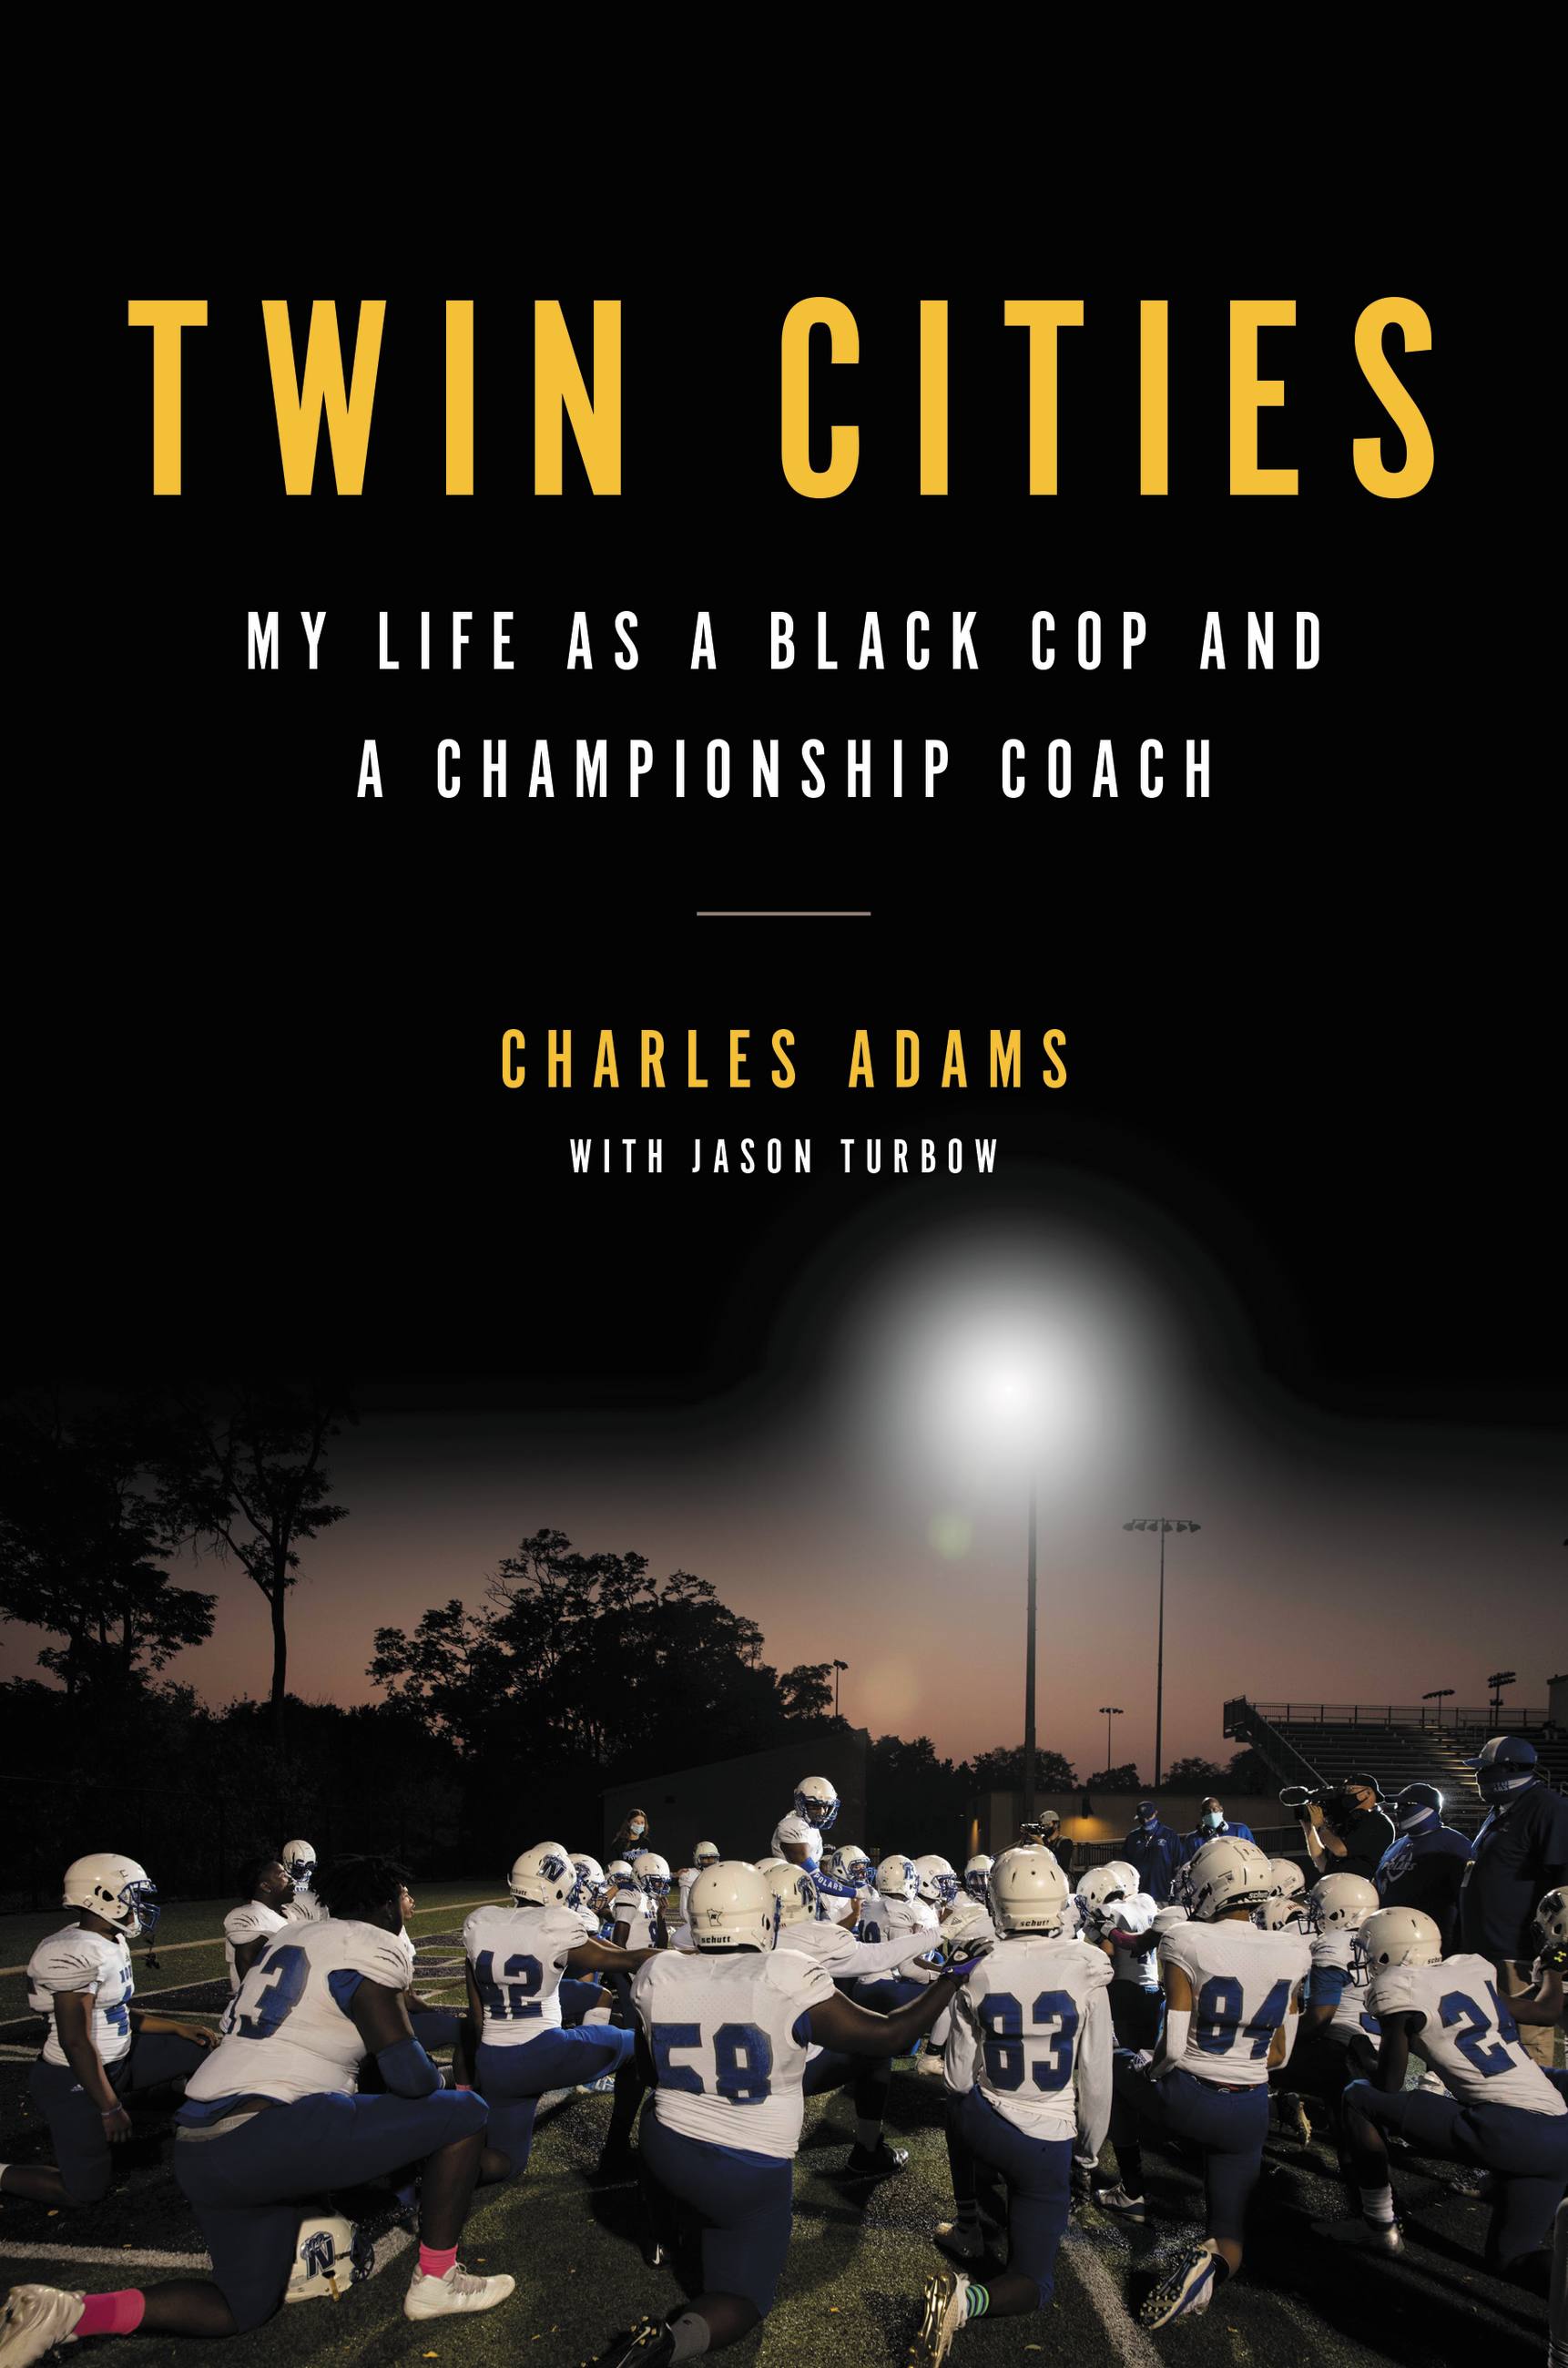 Twin Cities by Charles Adams